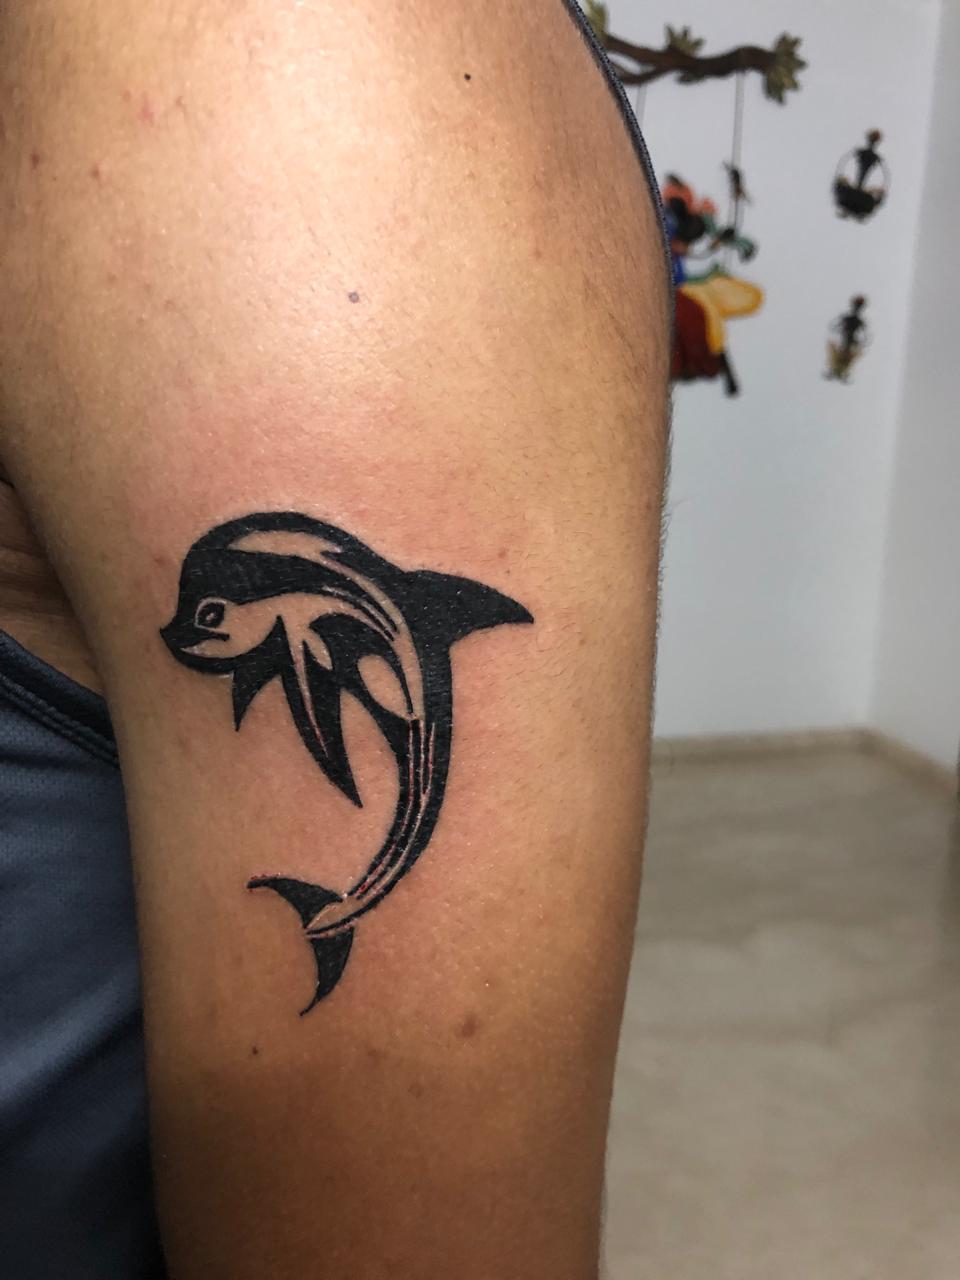 Micro-realistic dolphin tattoo on the ankle.